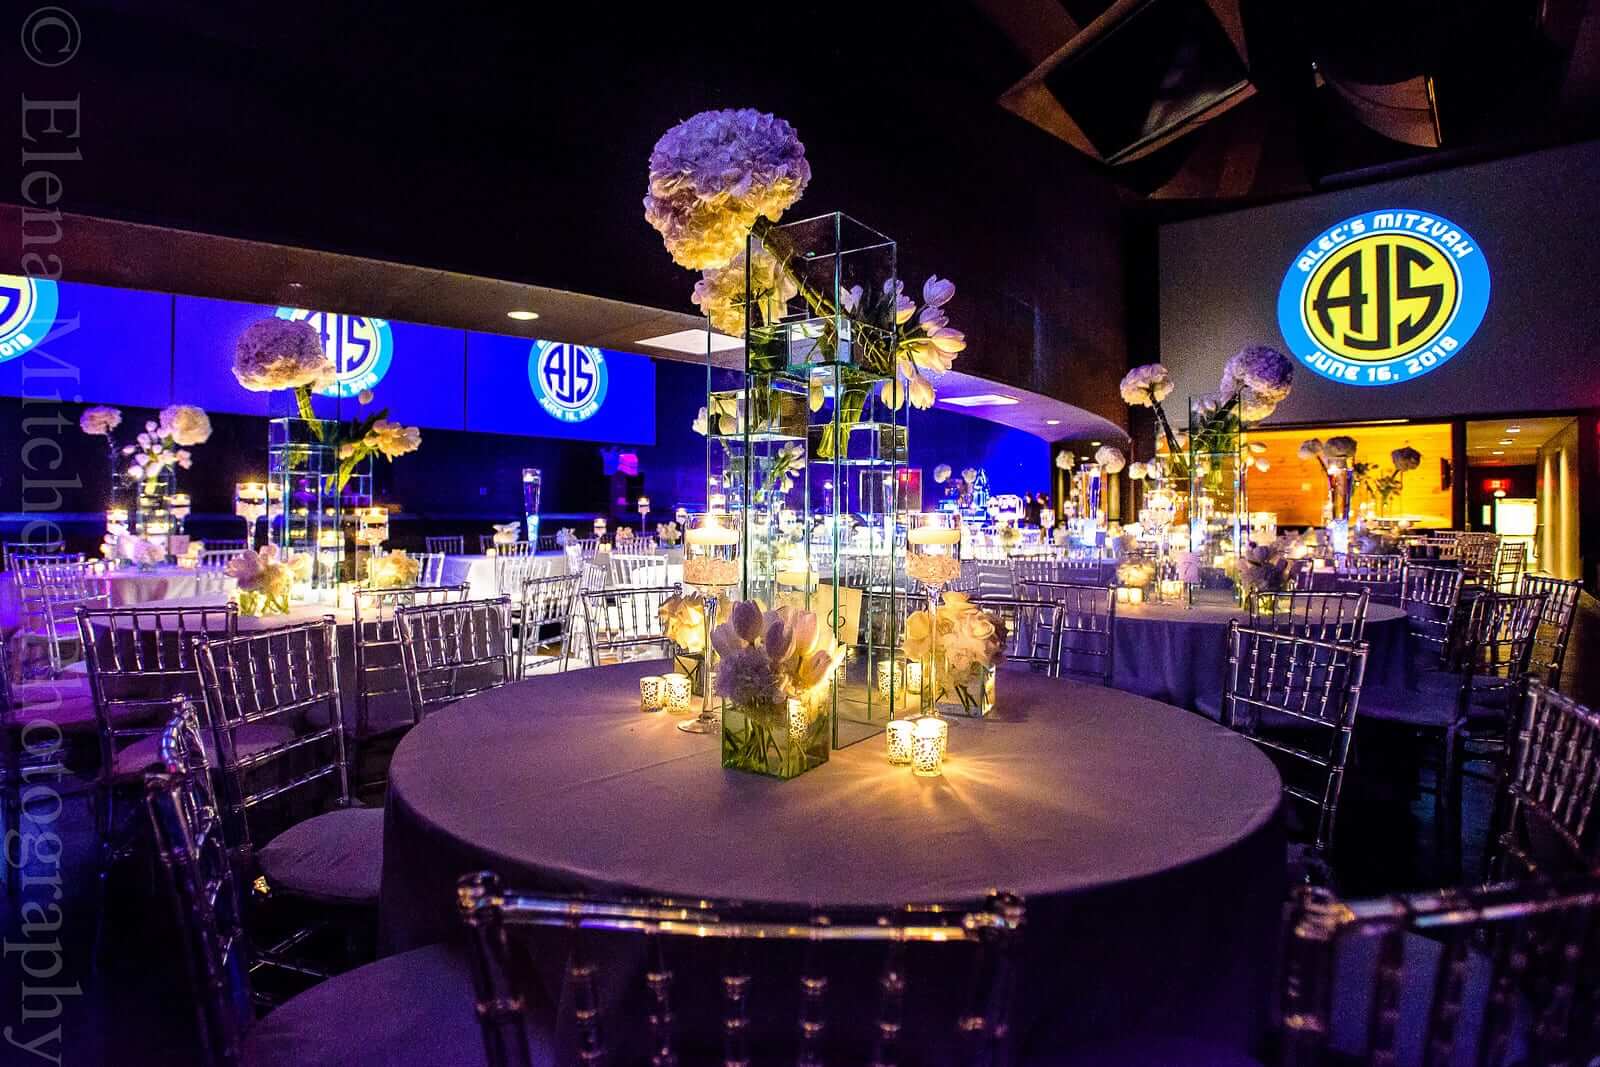 Elegant event space with round tables adorned with floral centerpieces and candles, lit by blue ambient lighting and featuring large celebratory banners with 